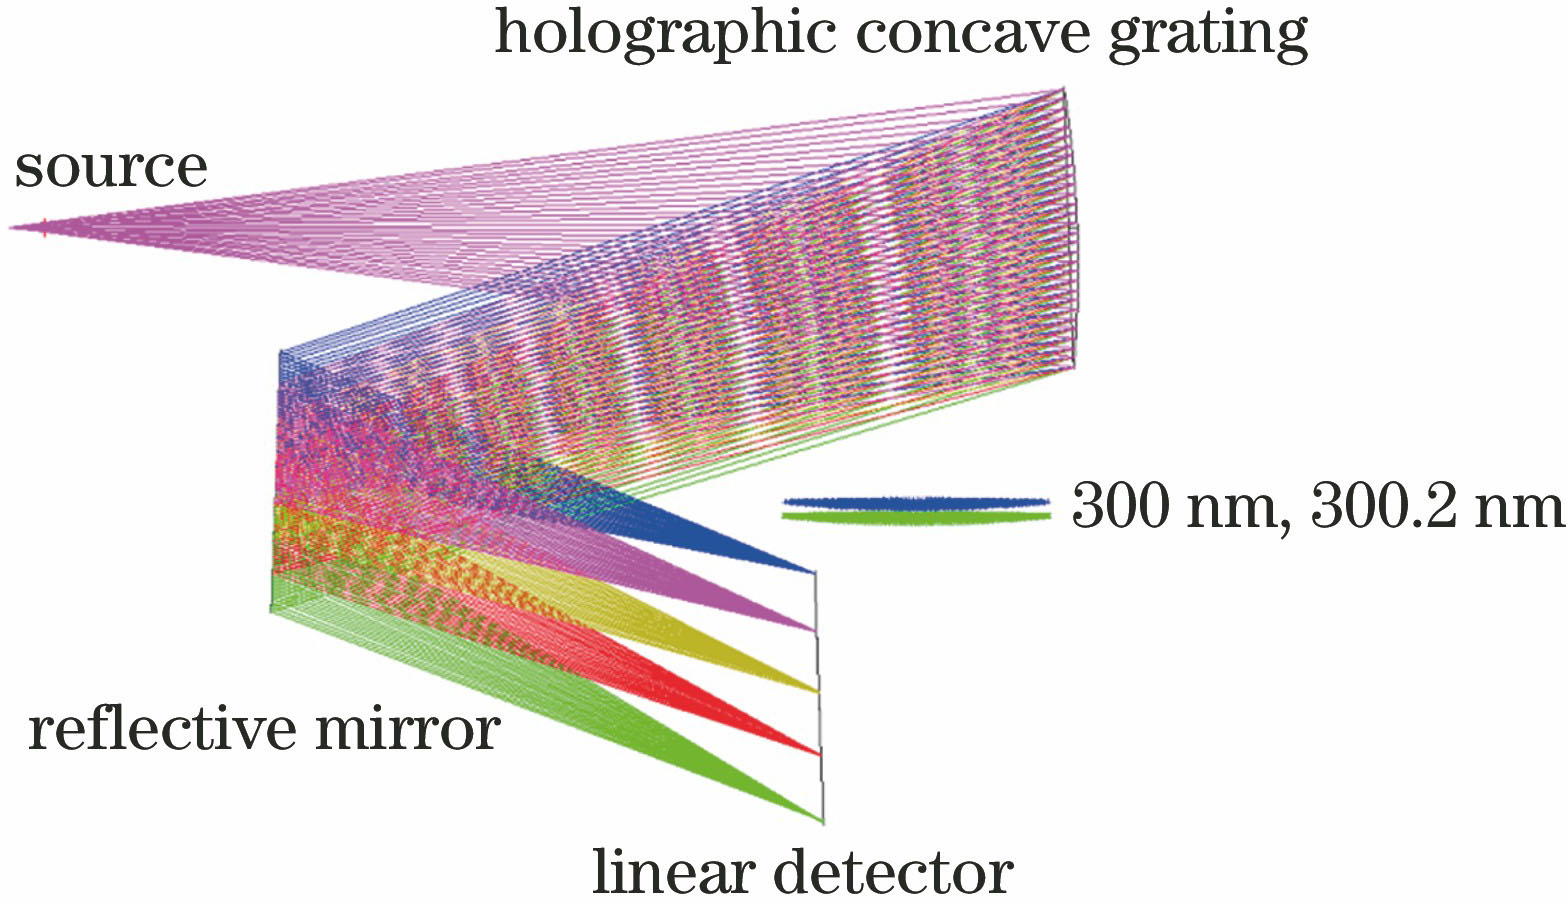 Simulation results of the flat field holographic concave grating